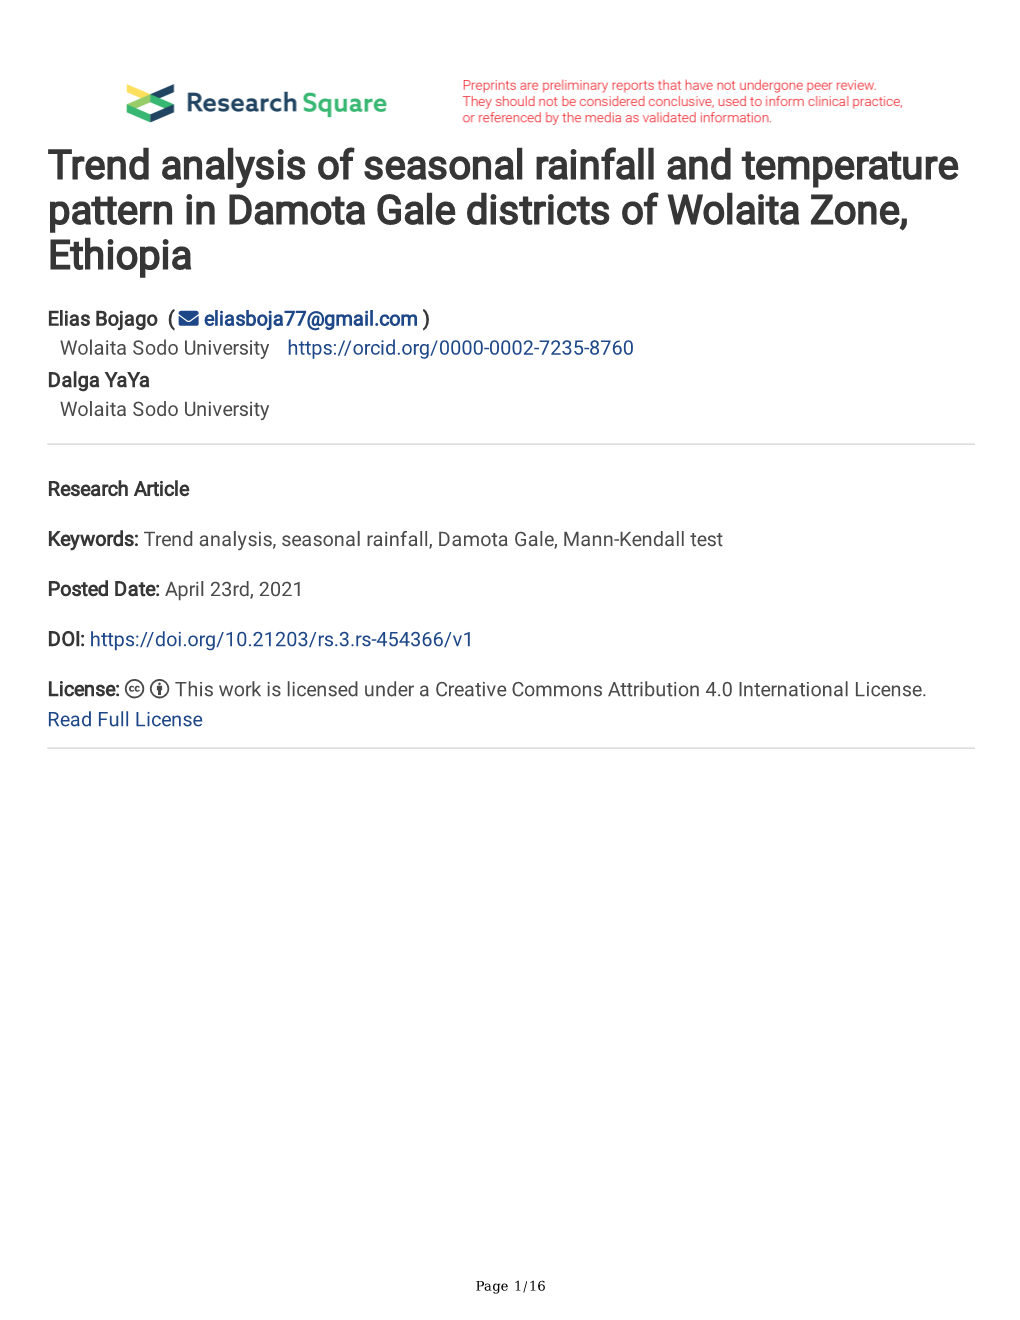 Trend Analysis of Seasonal Rainfall and Temperature Pattern in Damota Gale Districts of Wolaita Zone, Ethiopia